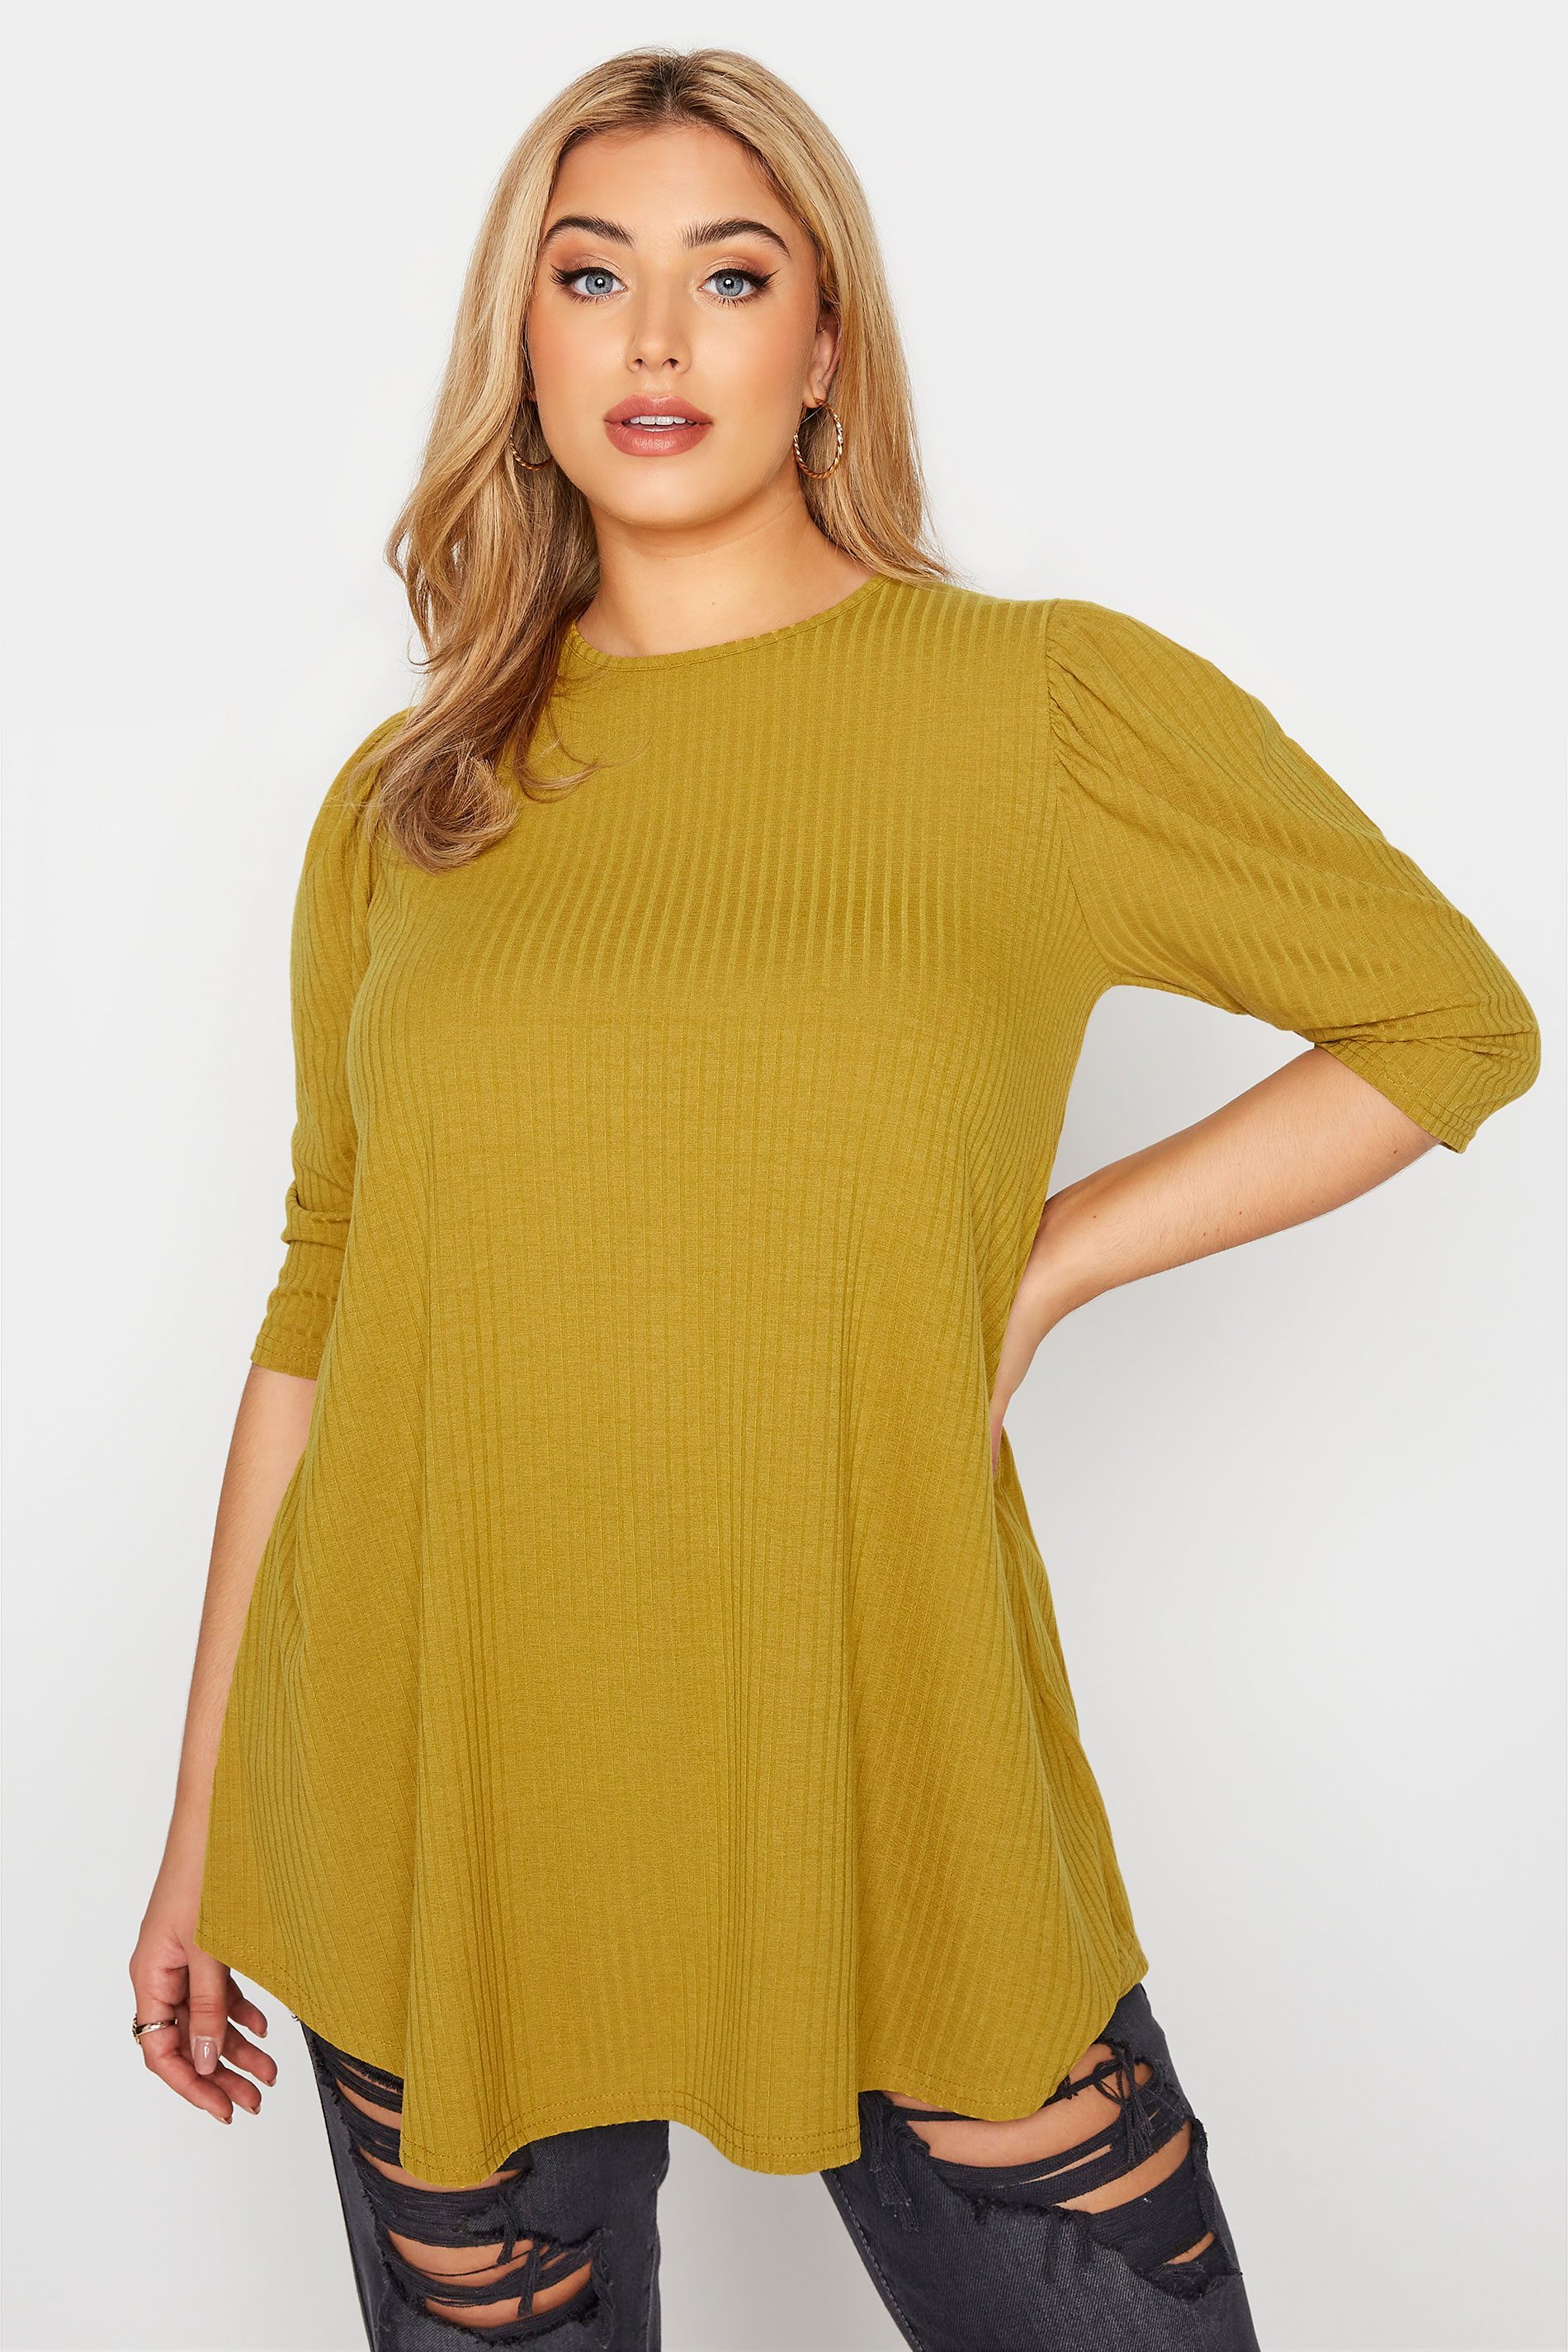 LIMITED COLLECTION Mustard Yellow Puff Sleeve Ribbed Top_A.jpg